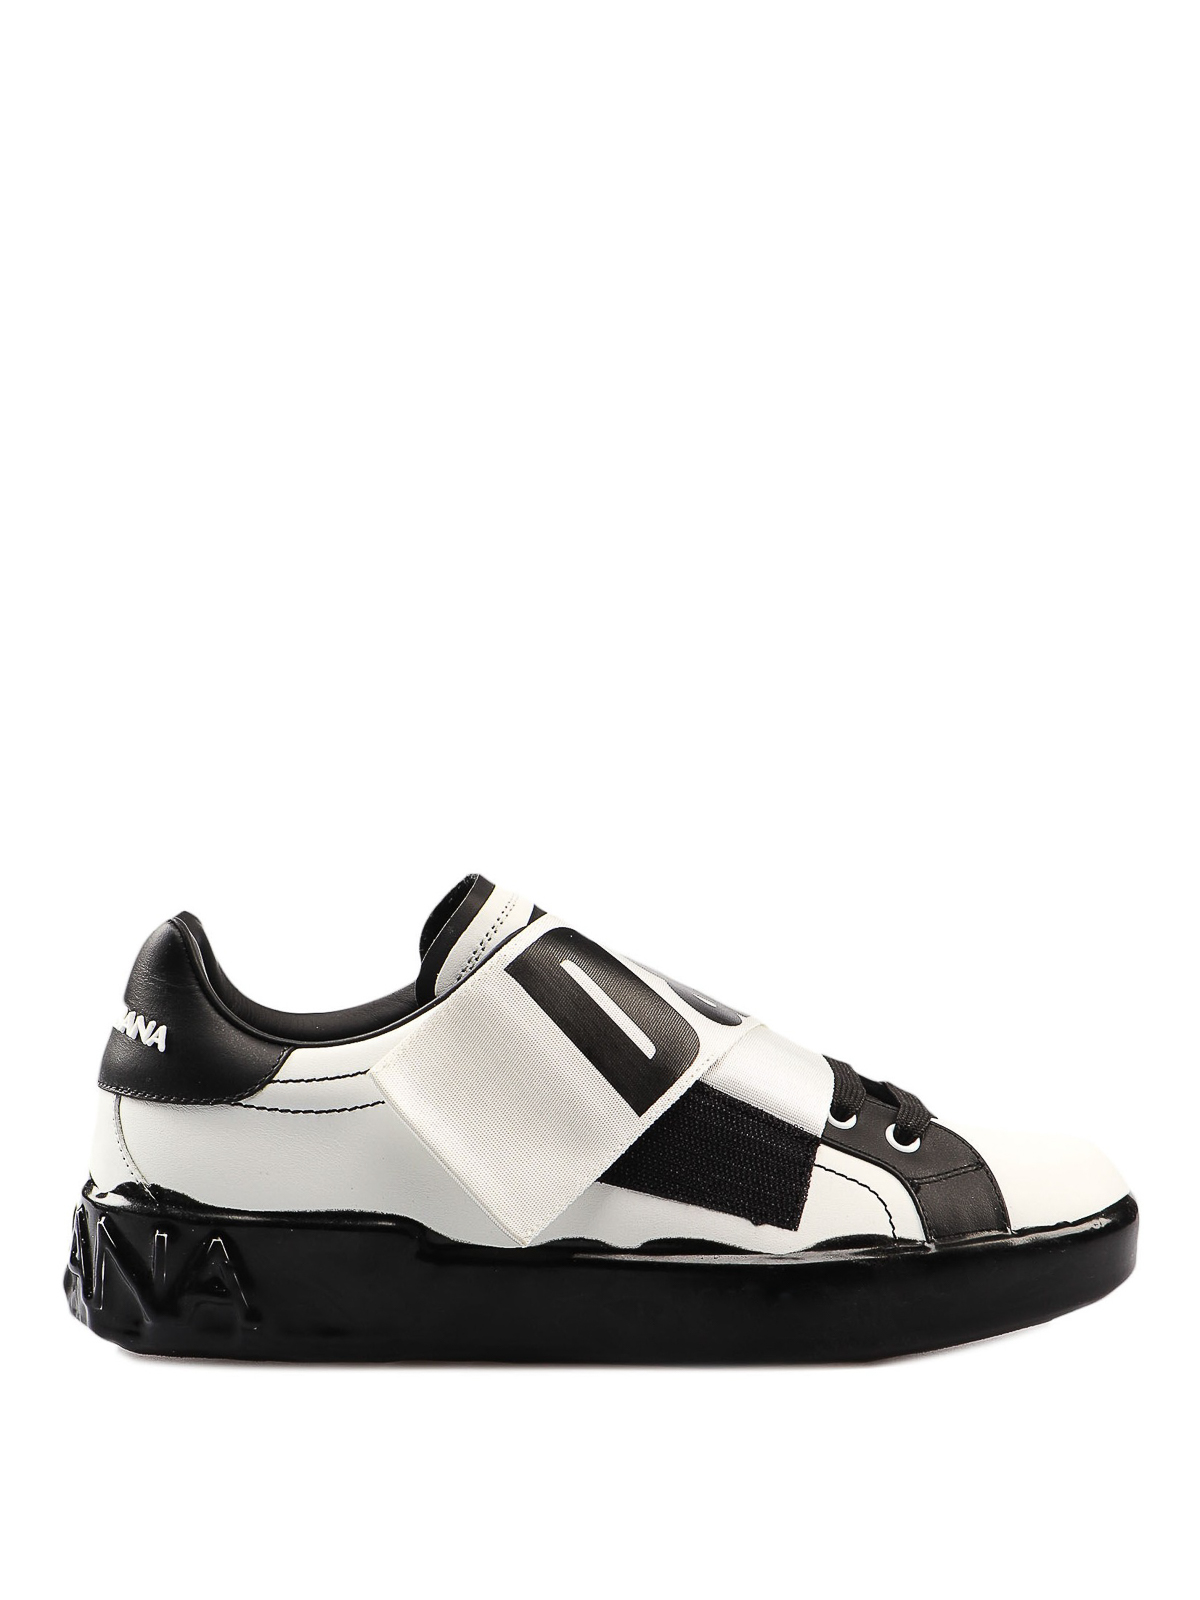 dolce and gabbana white and black sneakers